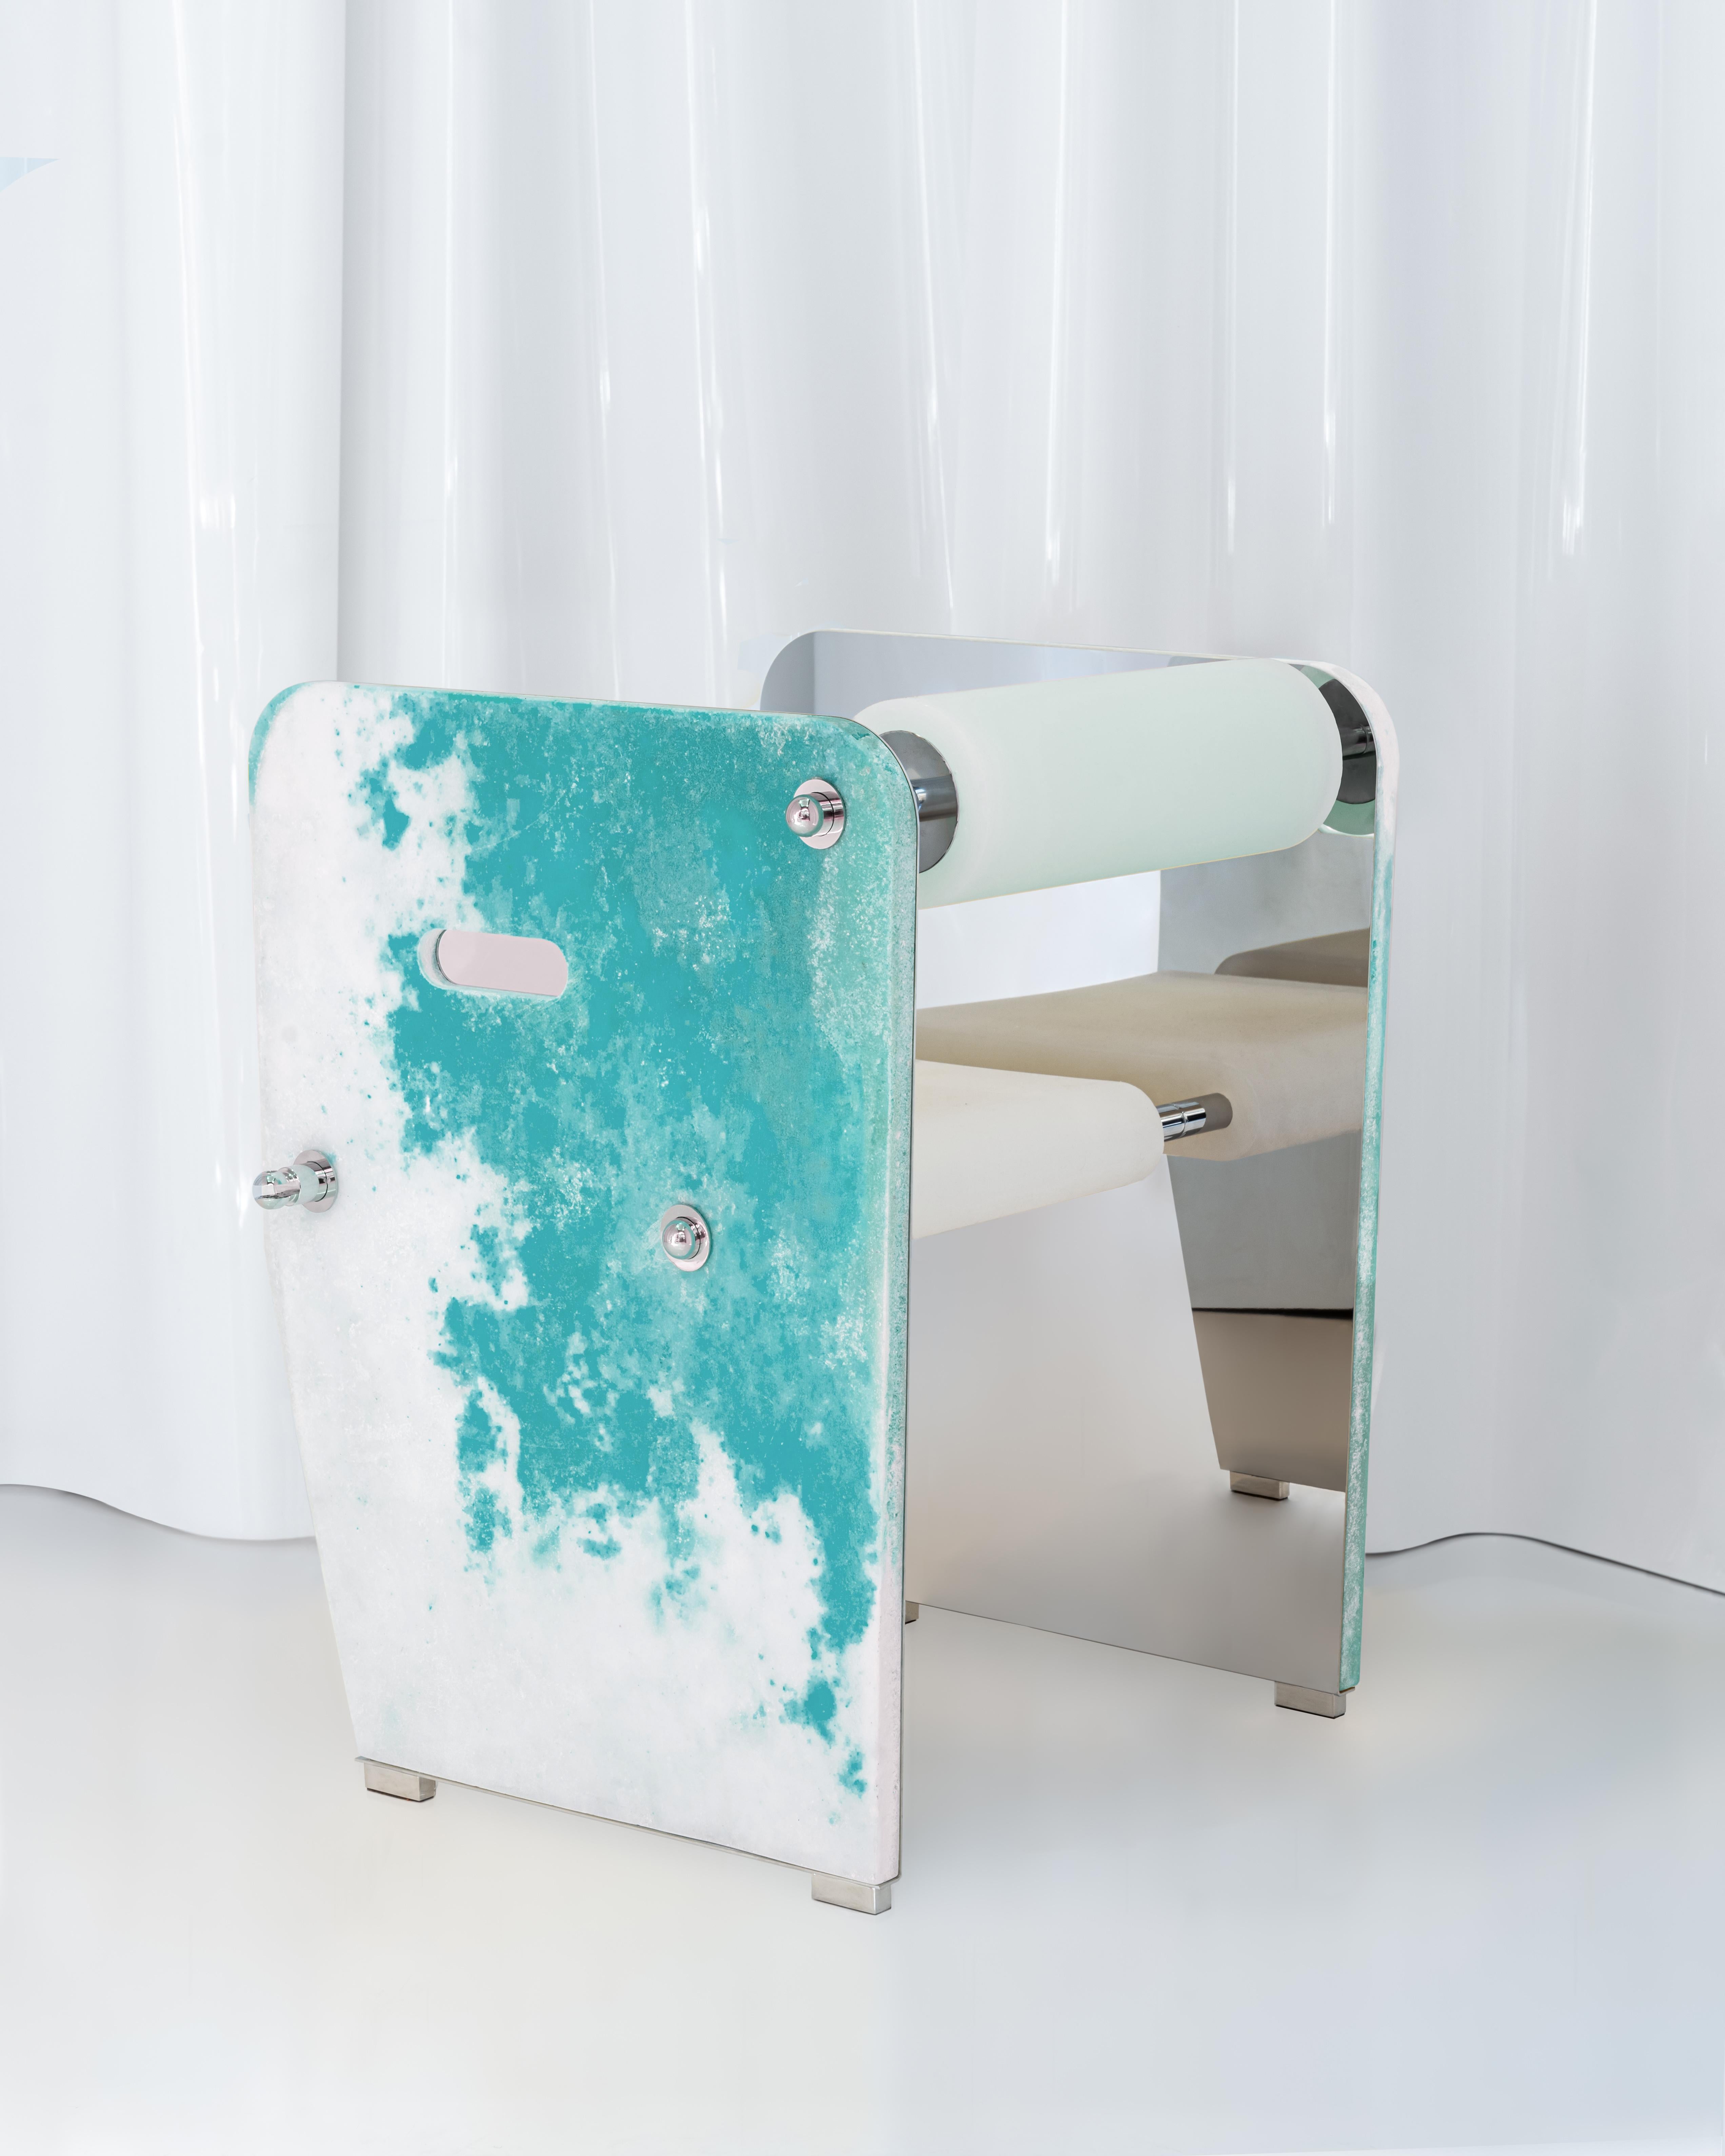 SIT/LIT consists of two stainless steel shoulders, with a chrome finish, horizontally connected to each other by tubular bars also made of steel. The seat and back are made of rubber, a translucent cast material whose consistency was chosen to